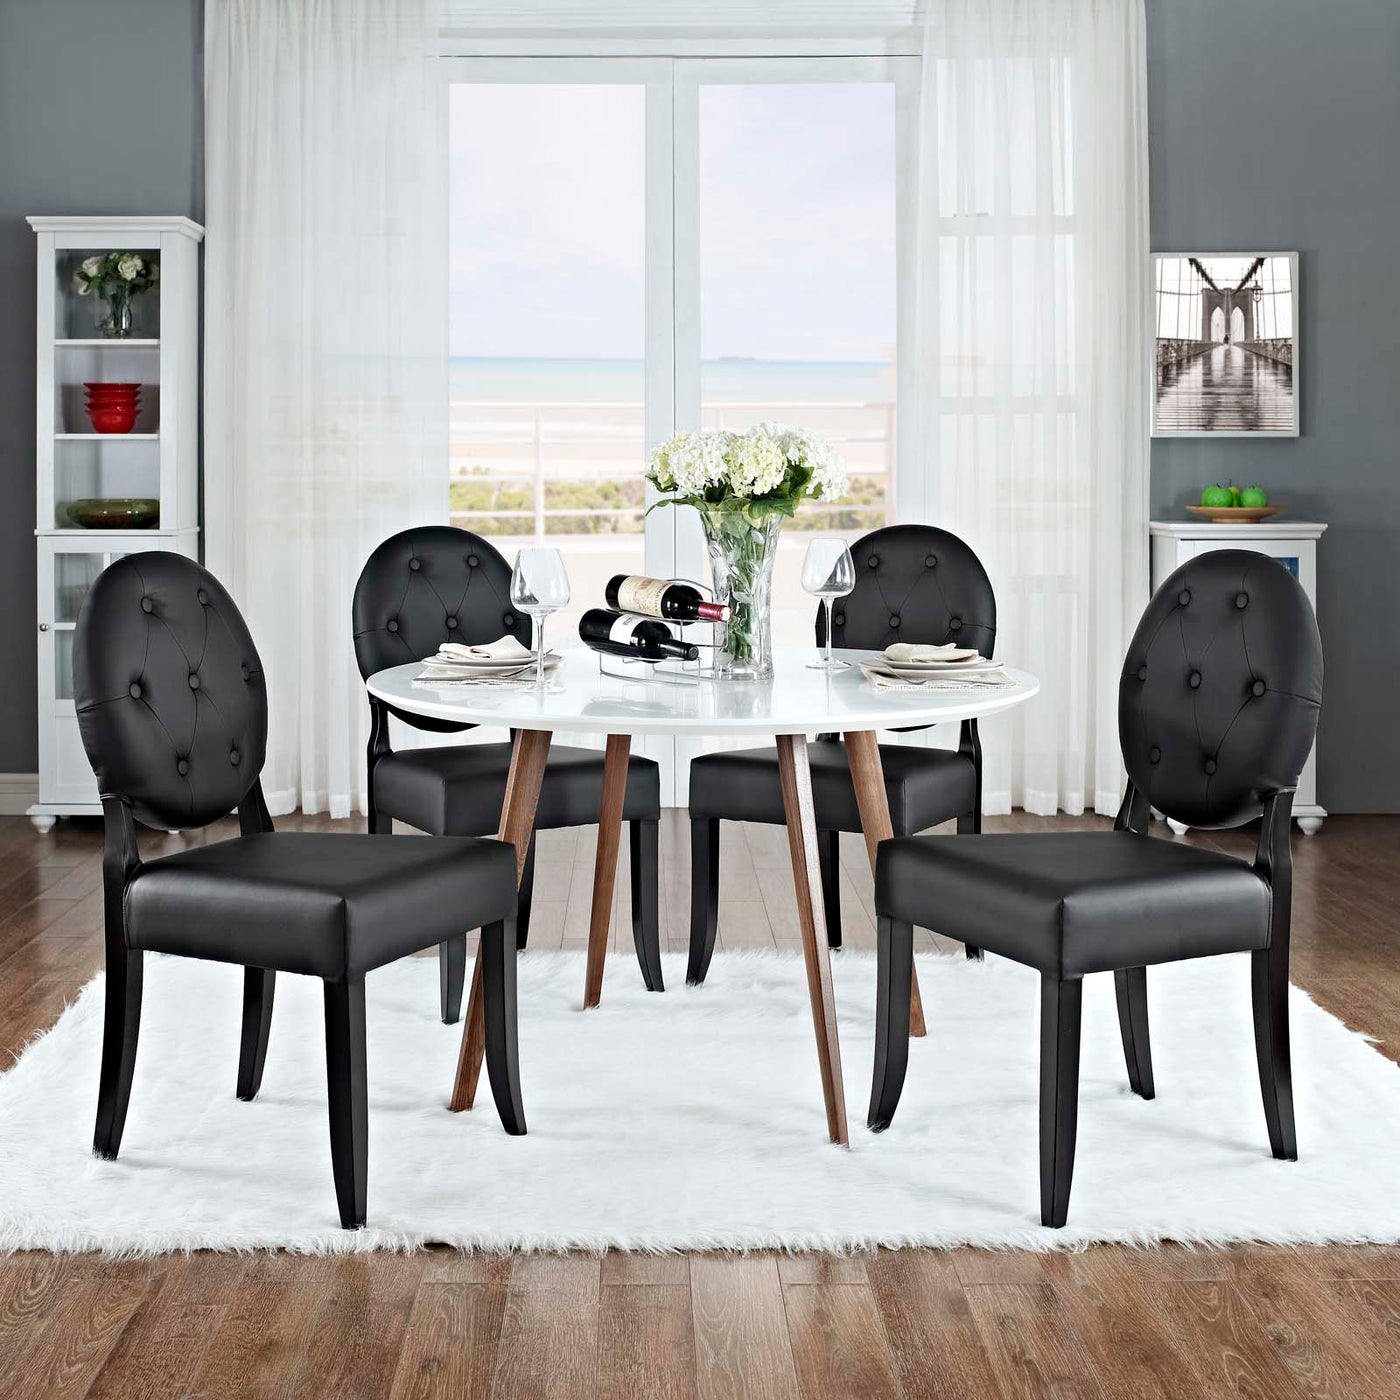 Button Dining Side Chair Set of 4